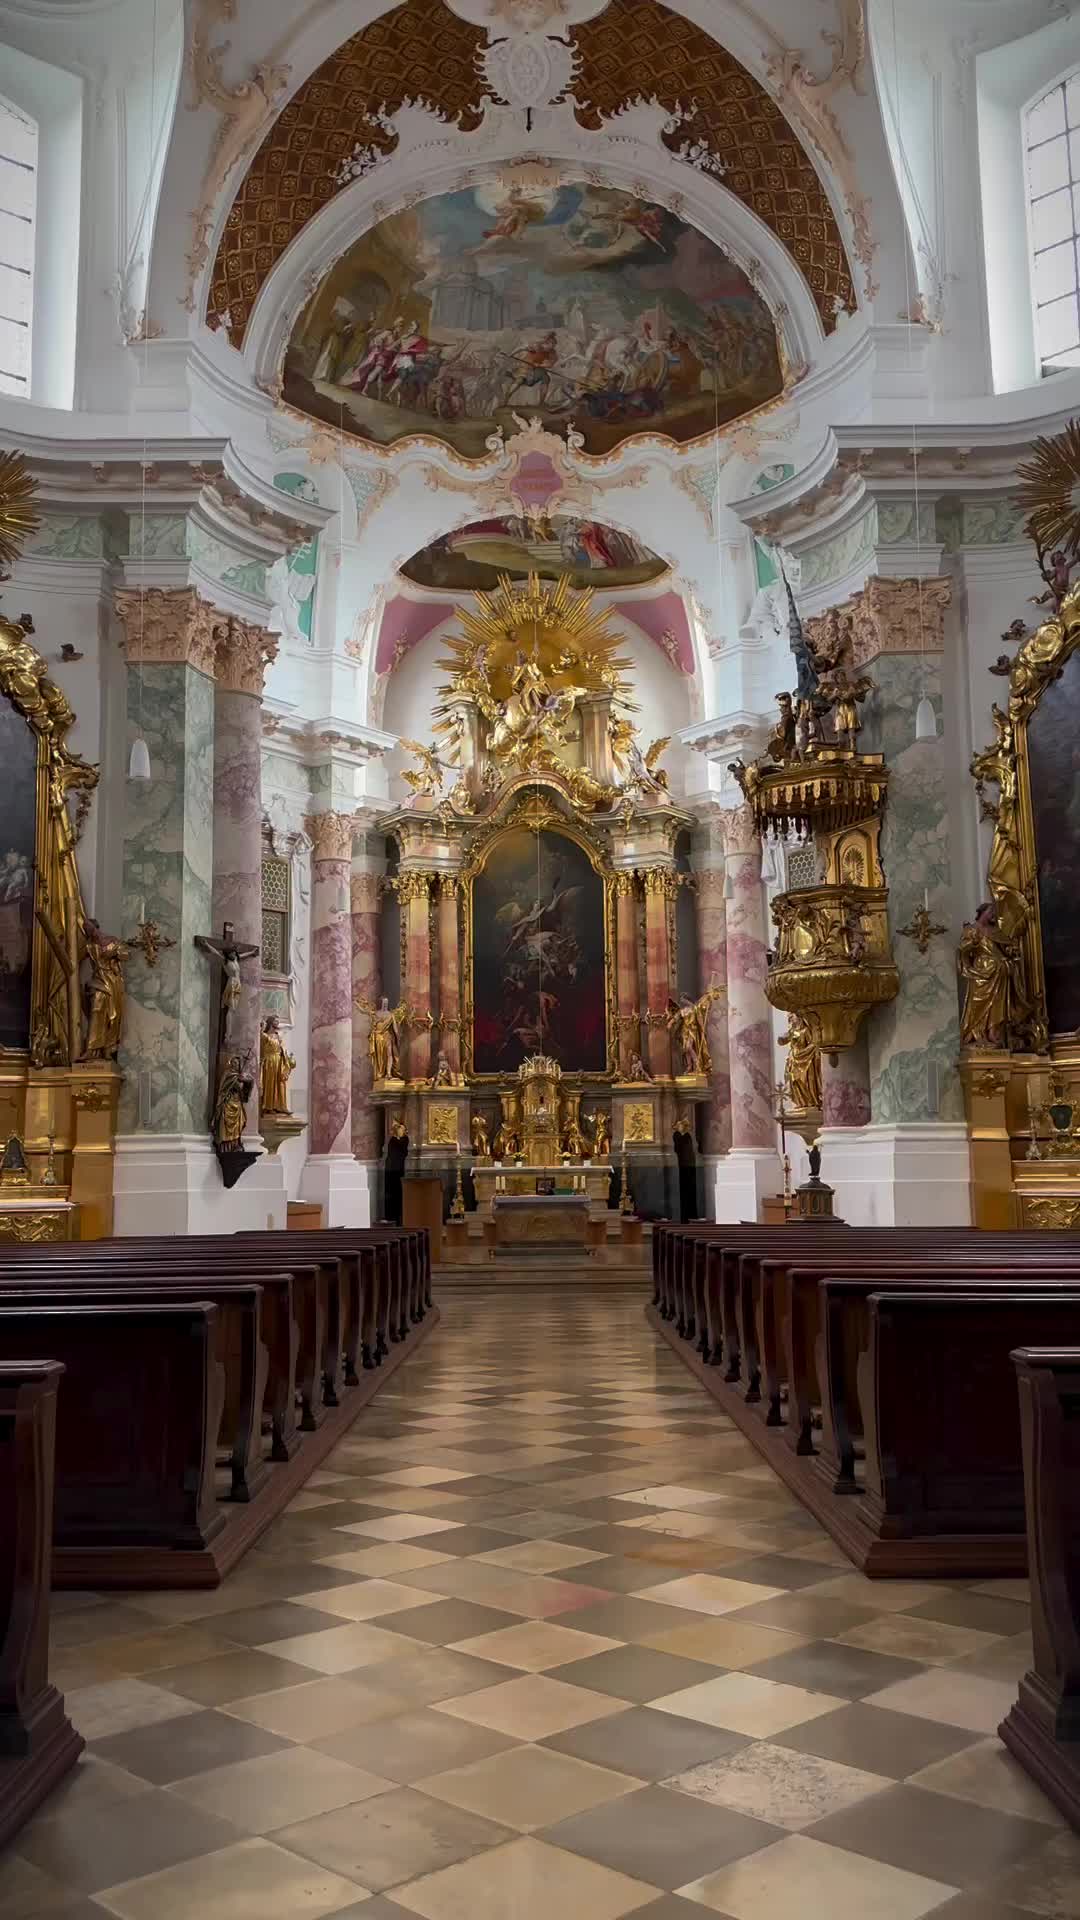 Discover St. Michael’s Baroque Beauty in Munich